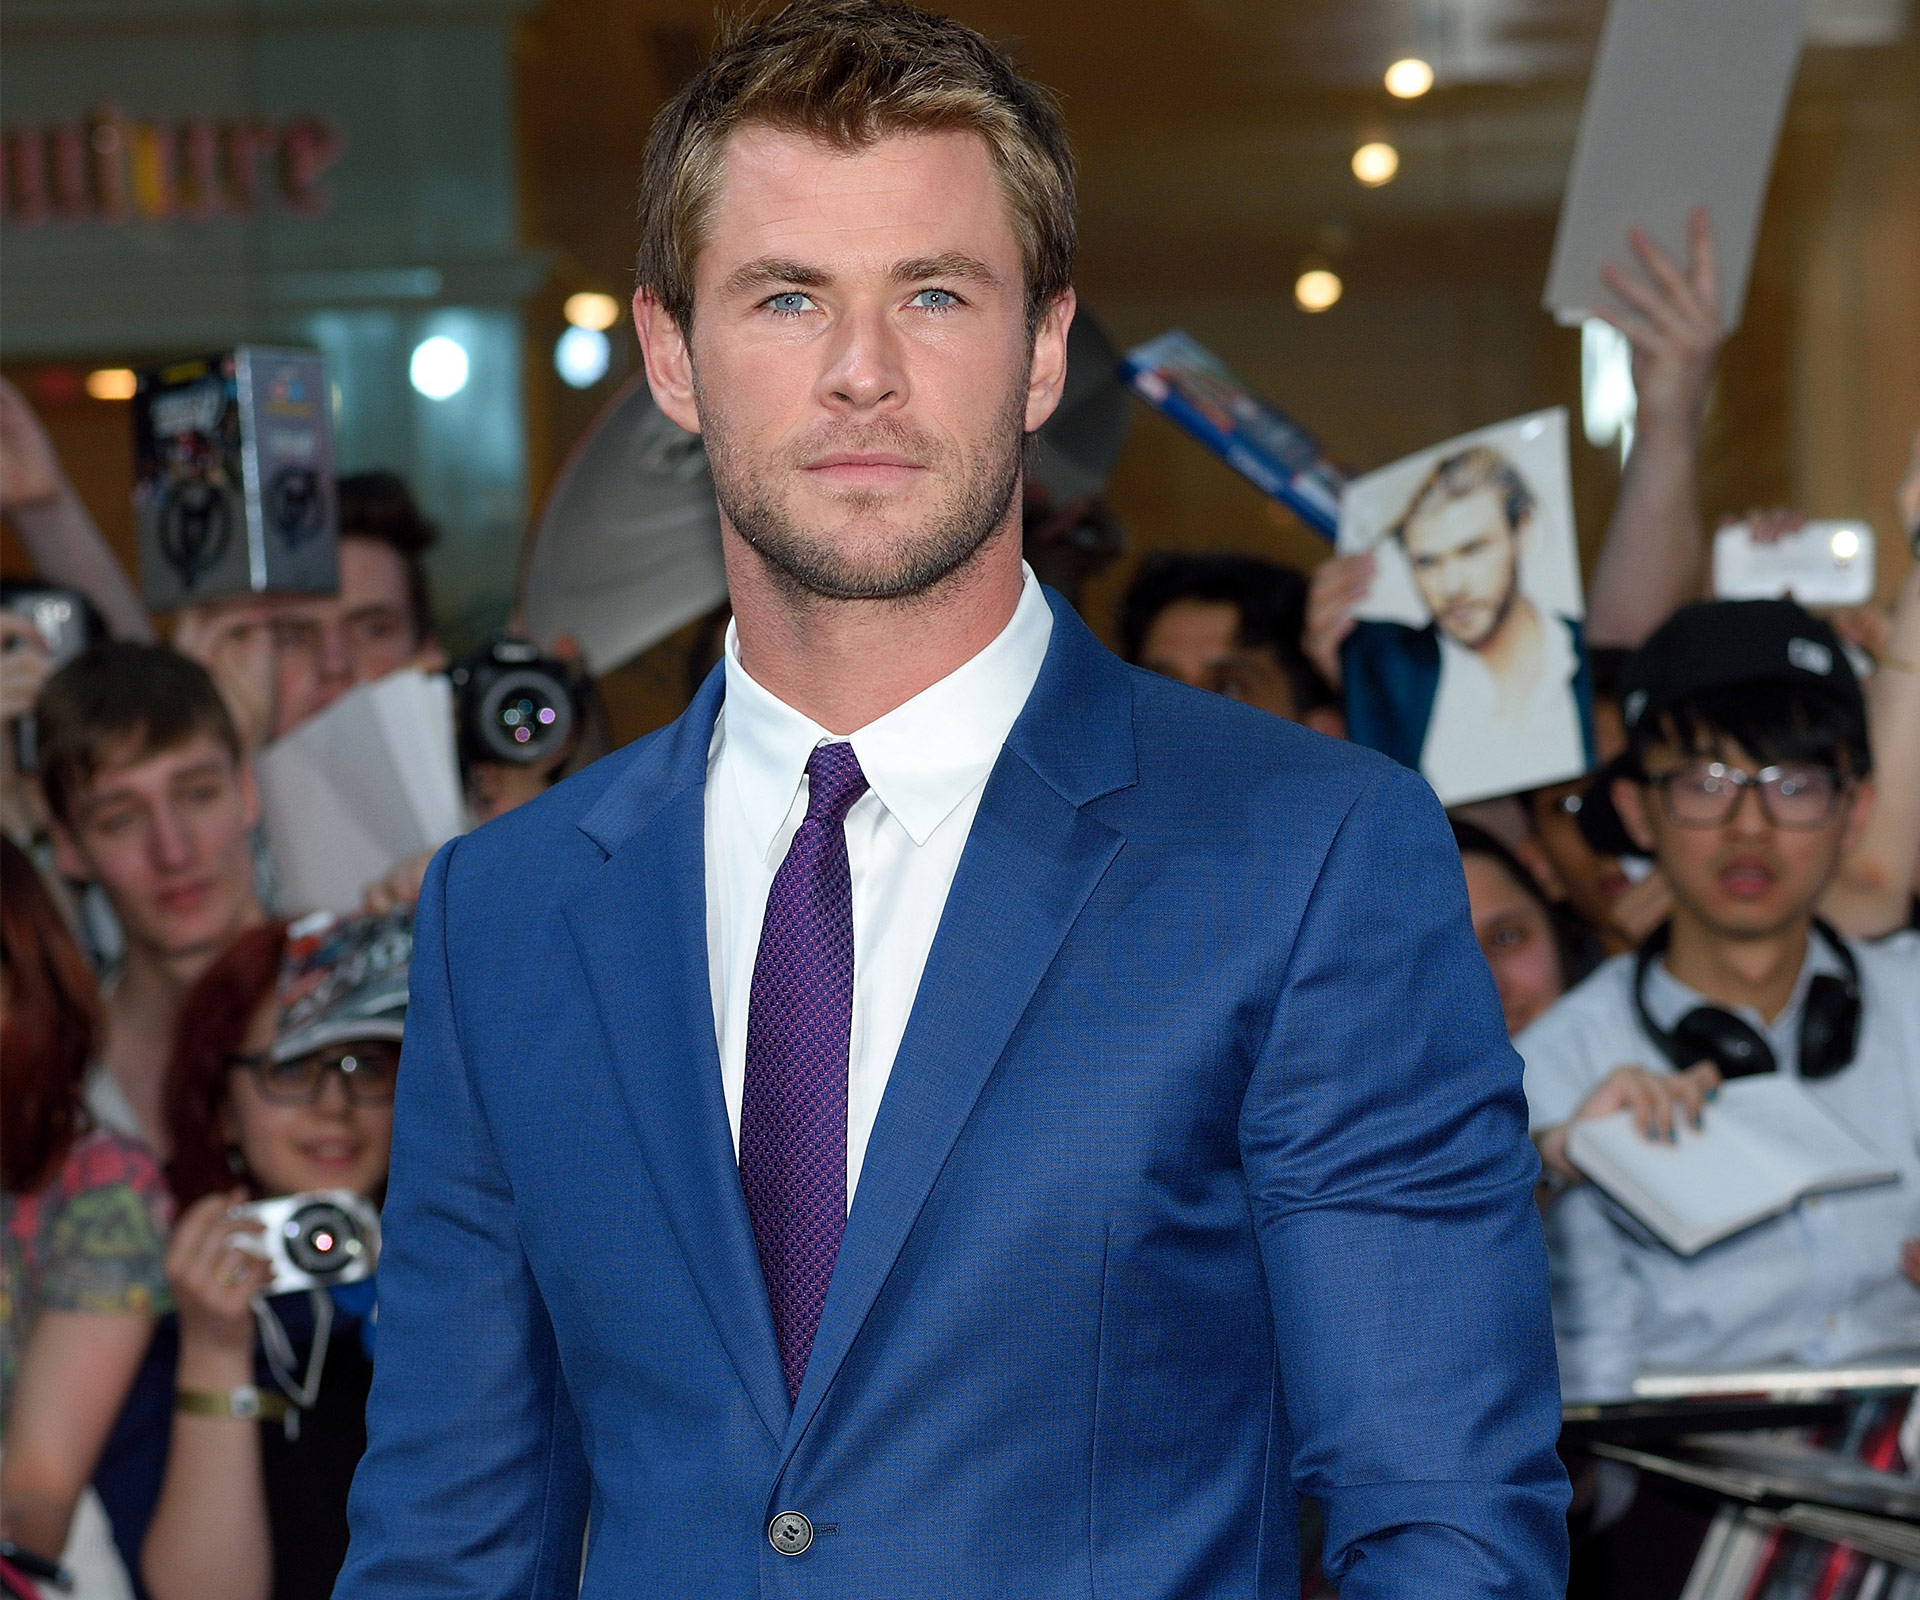 Chris Hemsworth reveals moving back to Australia was “the best decision we made”